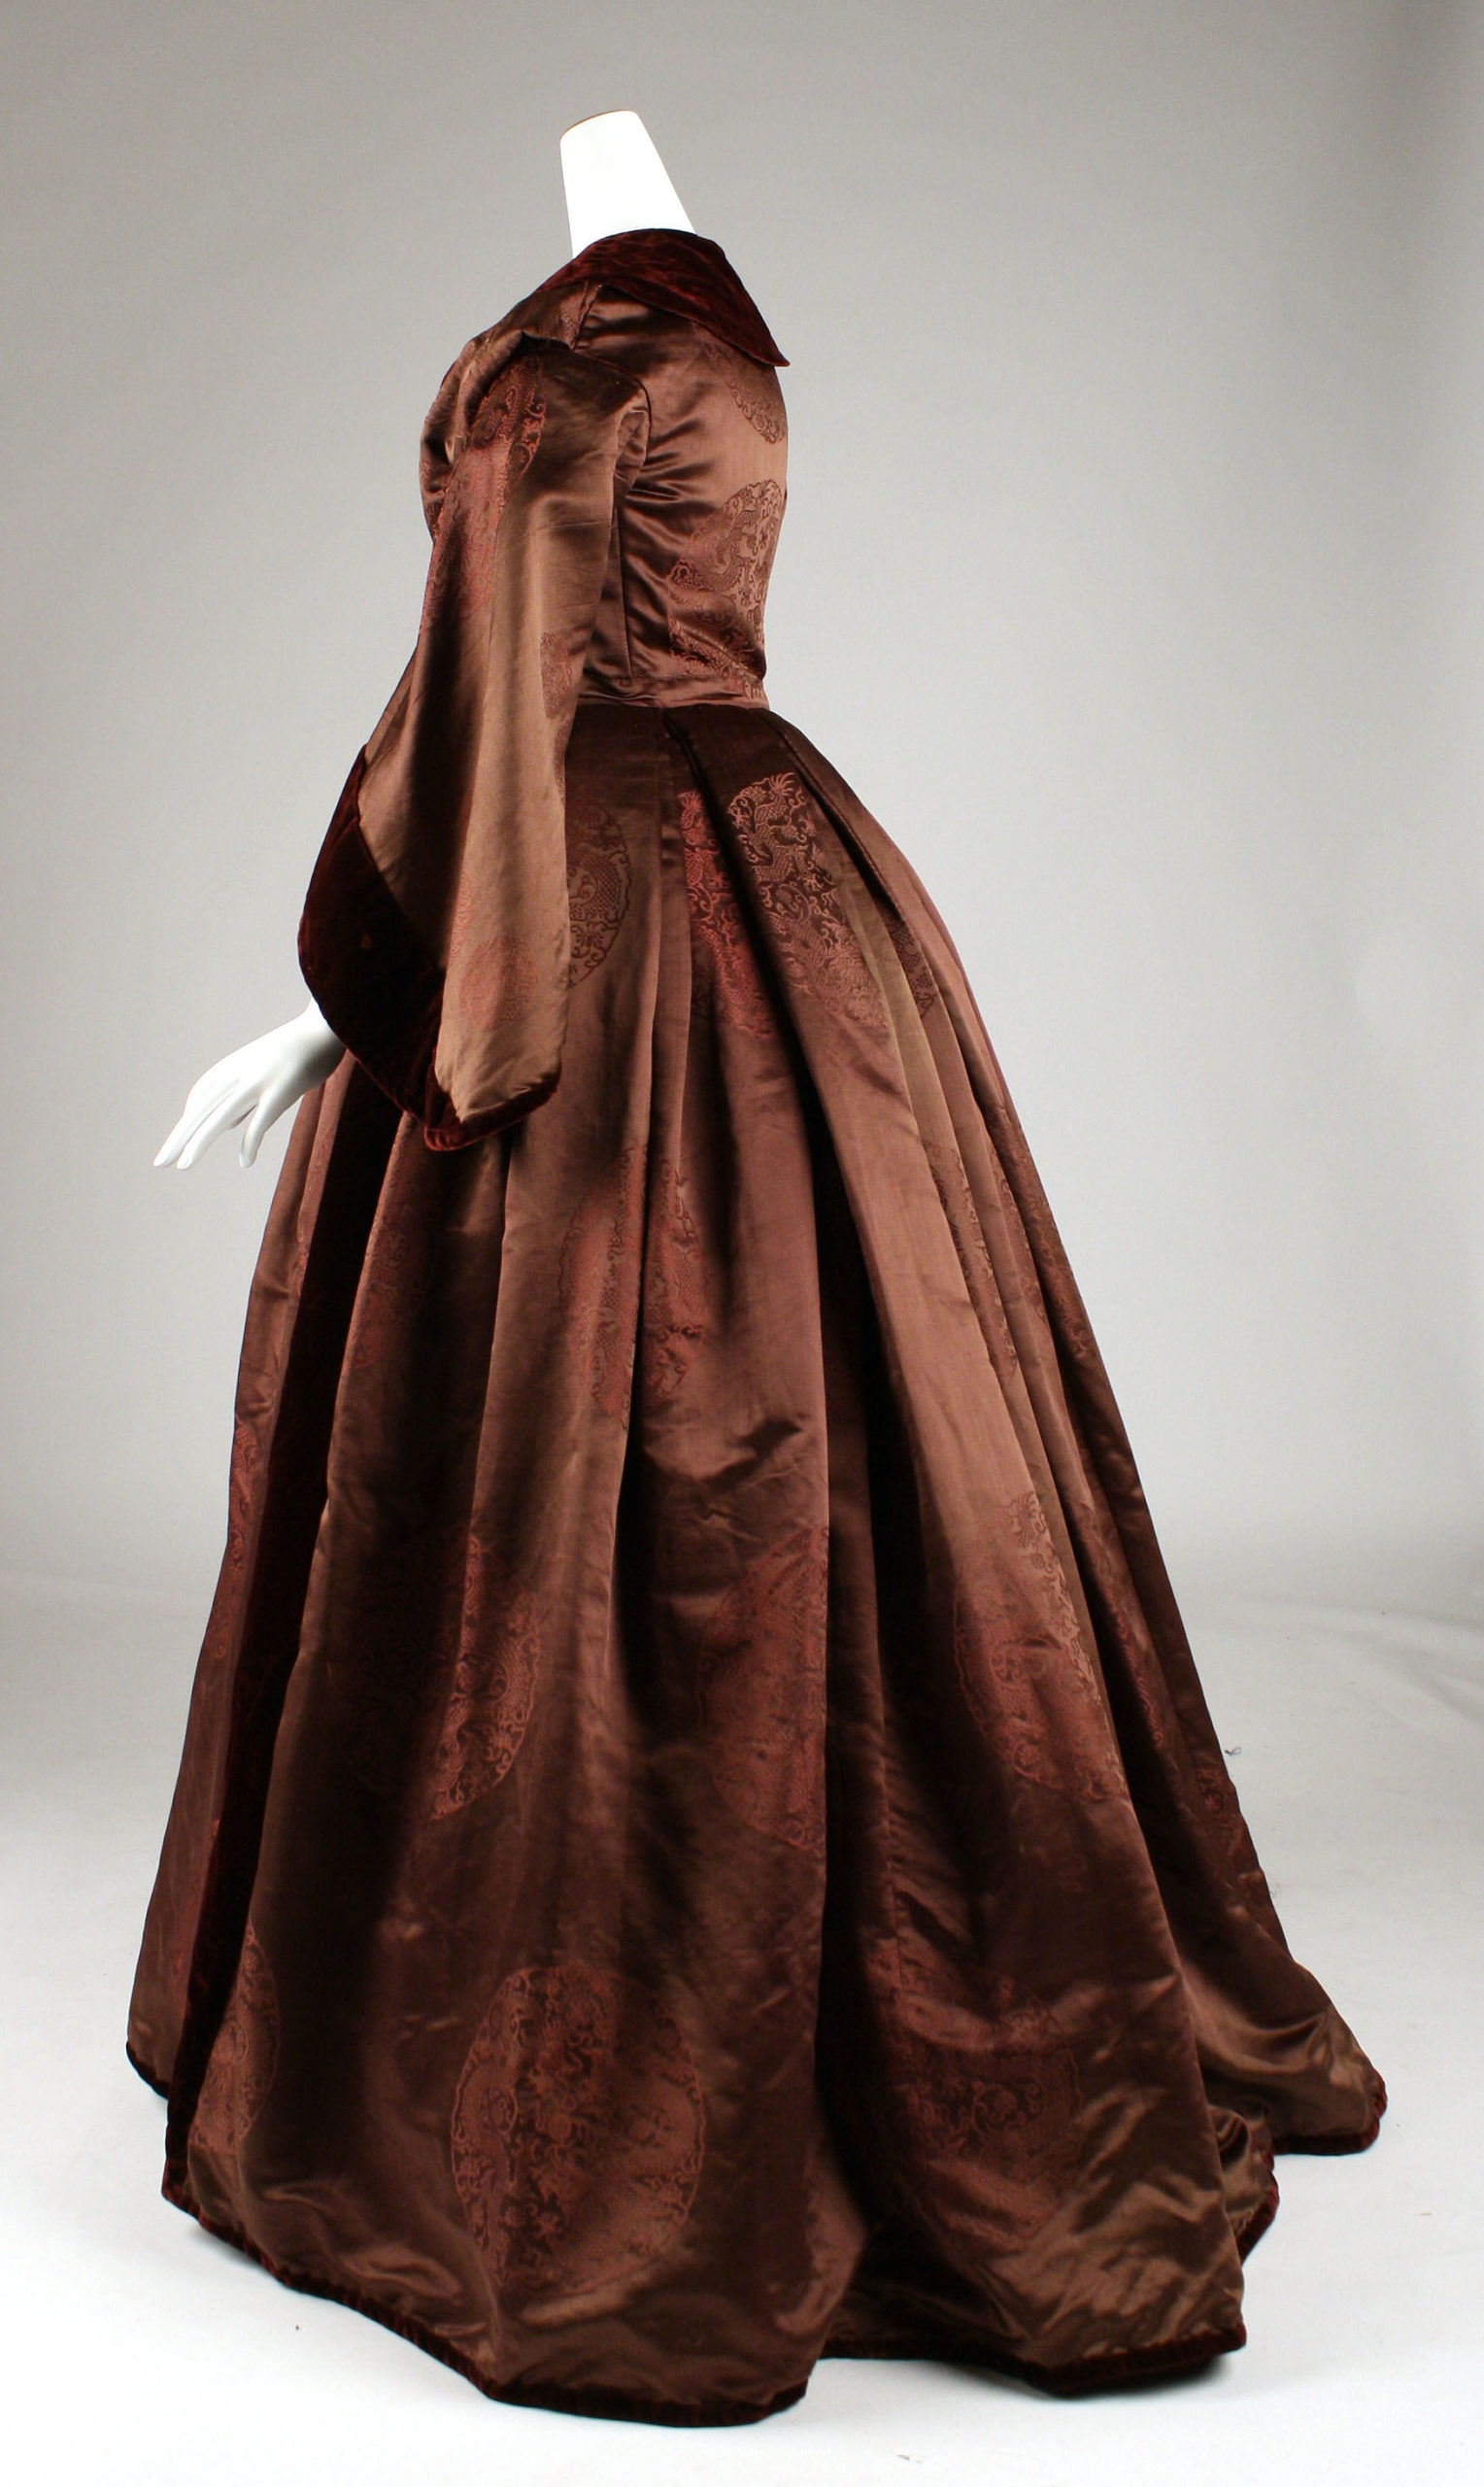 Day Dress, ca. 1850, British, silk, Purchase, Gifts in memory of Paul M. Ettesvold, and Judith and Gerson Leiber Fund, 1994, Metropolitan Museum of Art, 1994.302.1